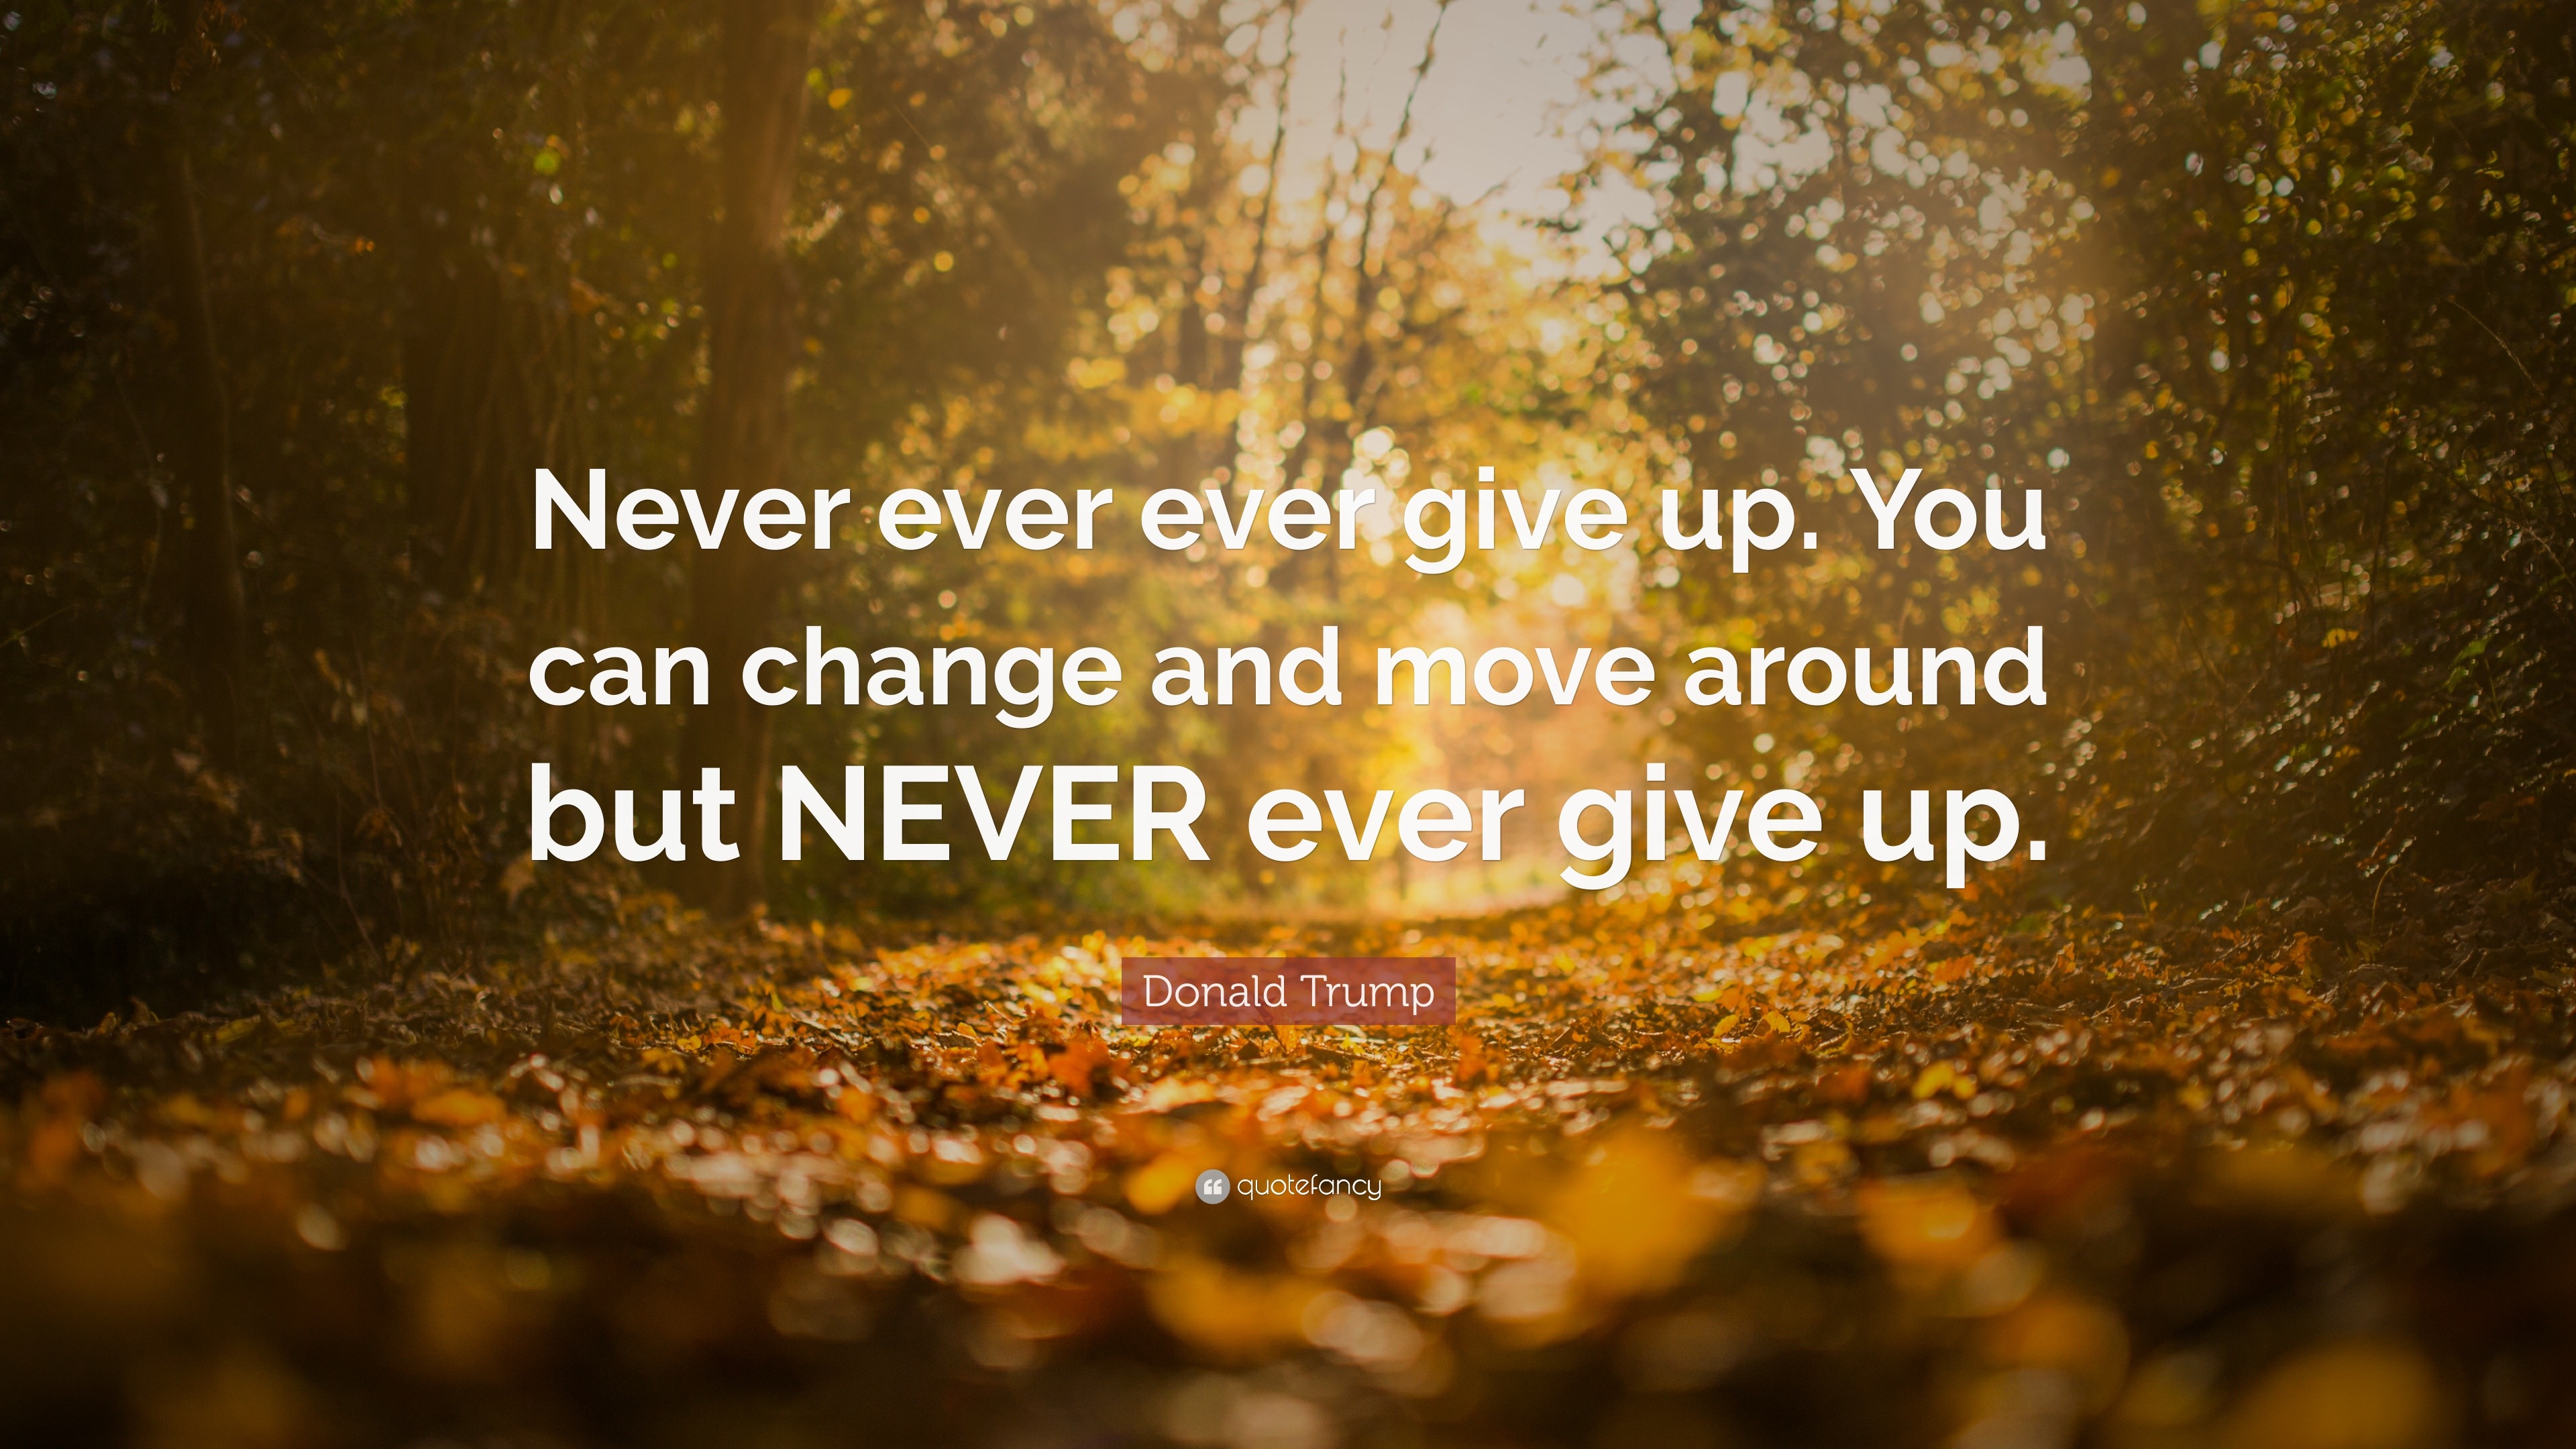 Donald Trump Quote: “Never ever ever give up. You can change and move